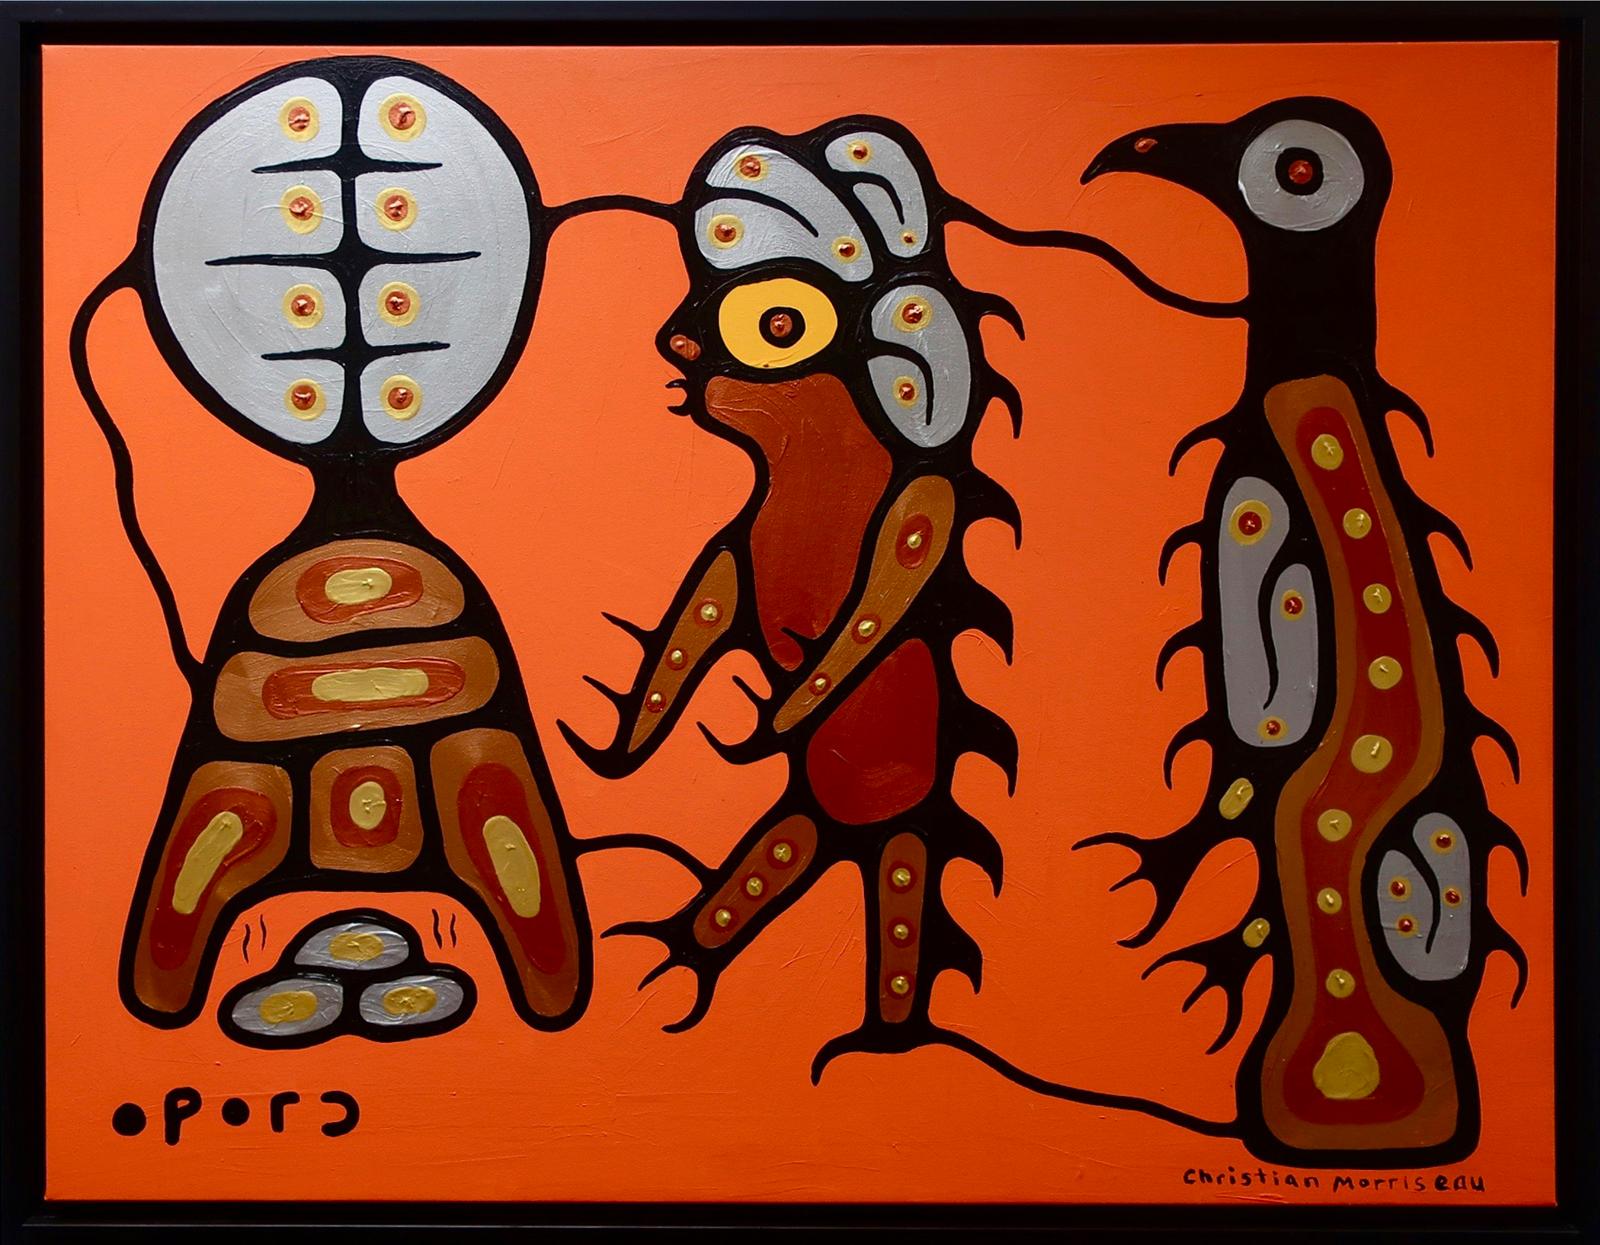 Christian Morrisseau (1969) - High And Lifted Up As The Shaman Cries Out To The Spirit